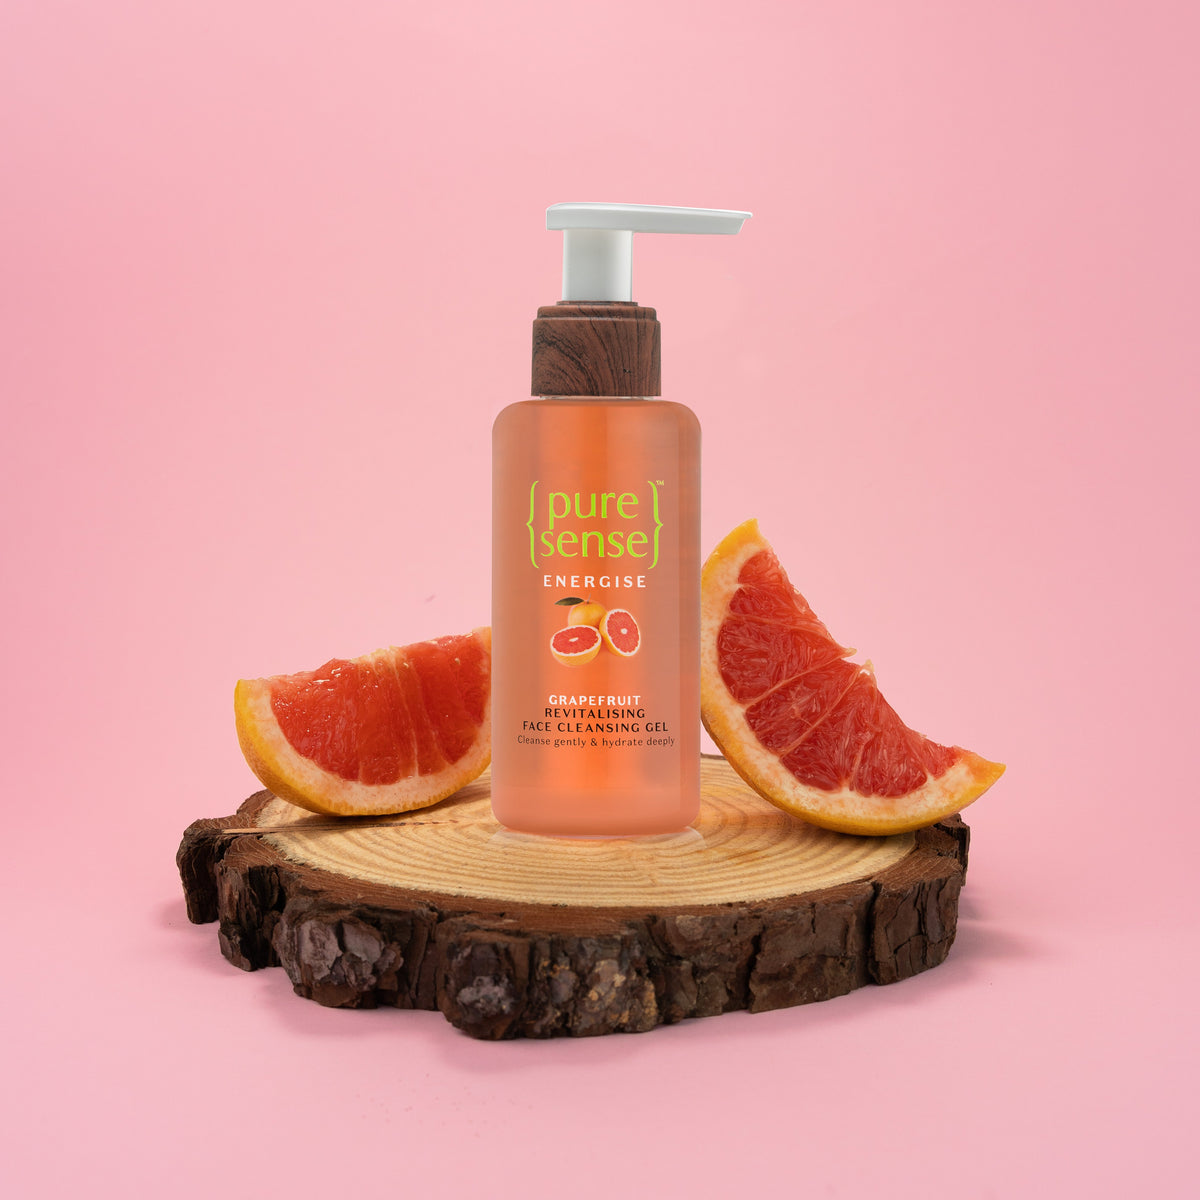 [CRED] Energise Grapefruit Revitalising Face Cleansing Gel (Face Wash) | From the makers of Parachute Advansed | 100ml